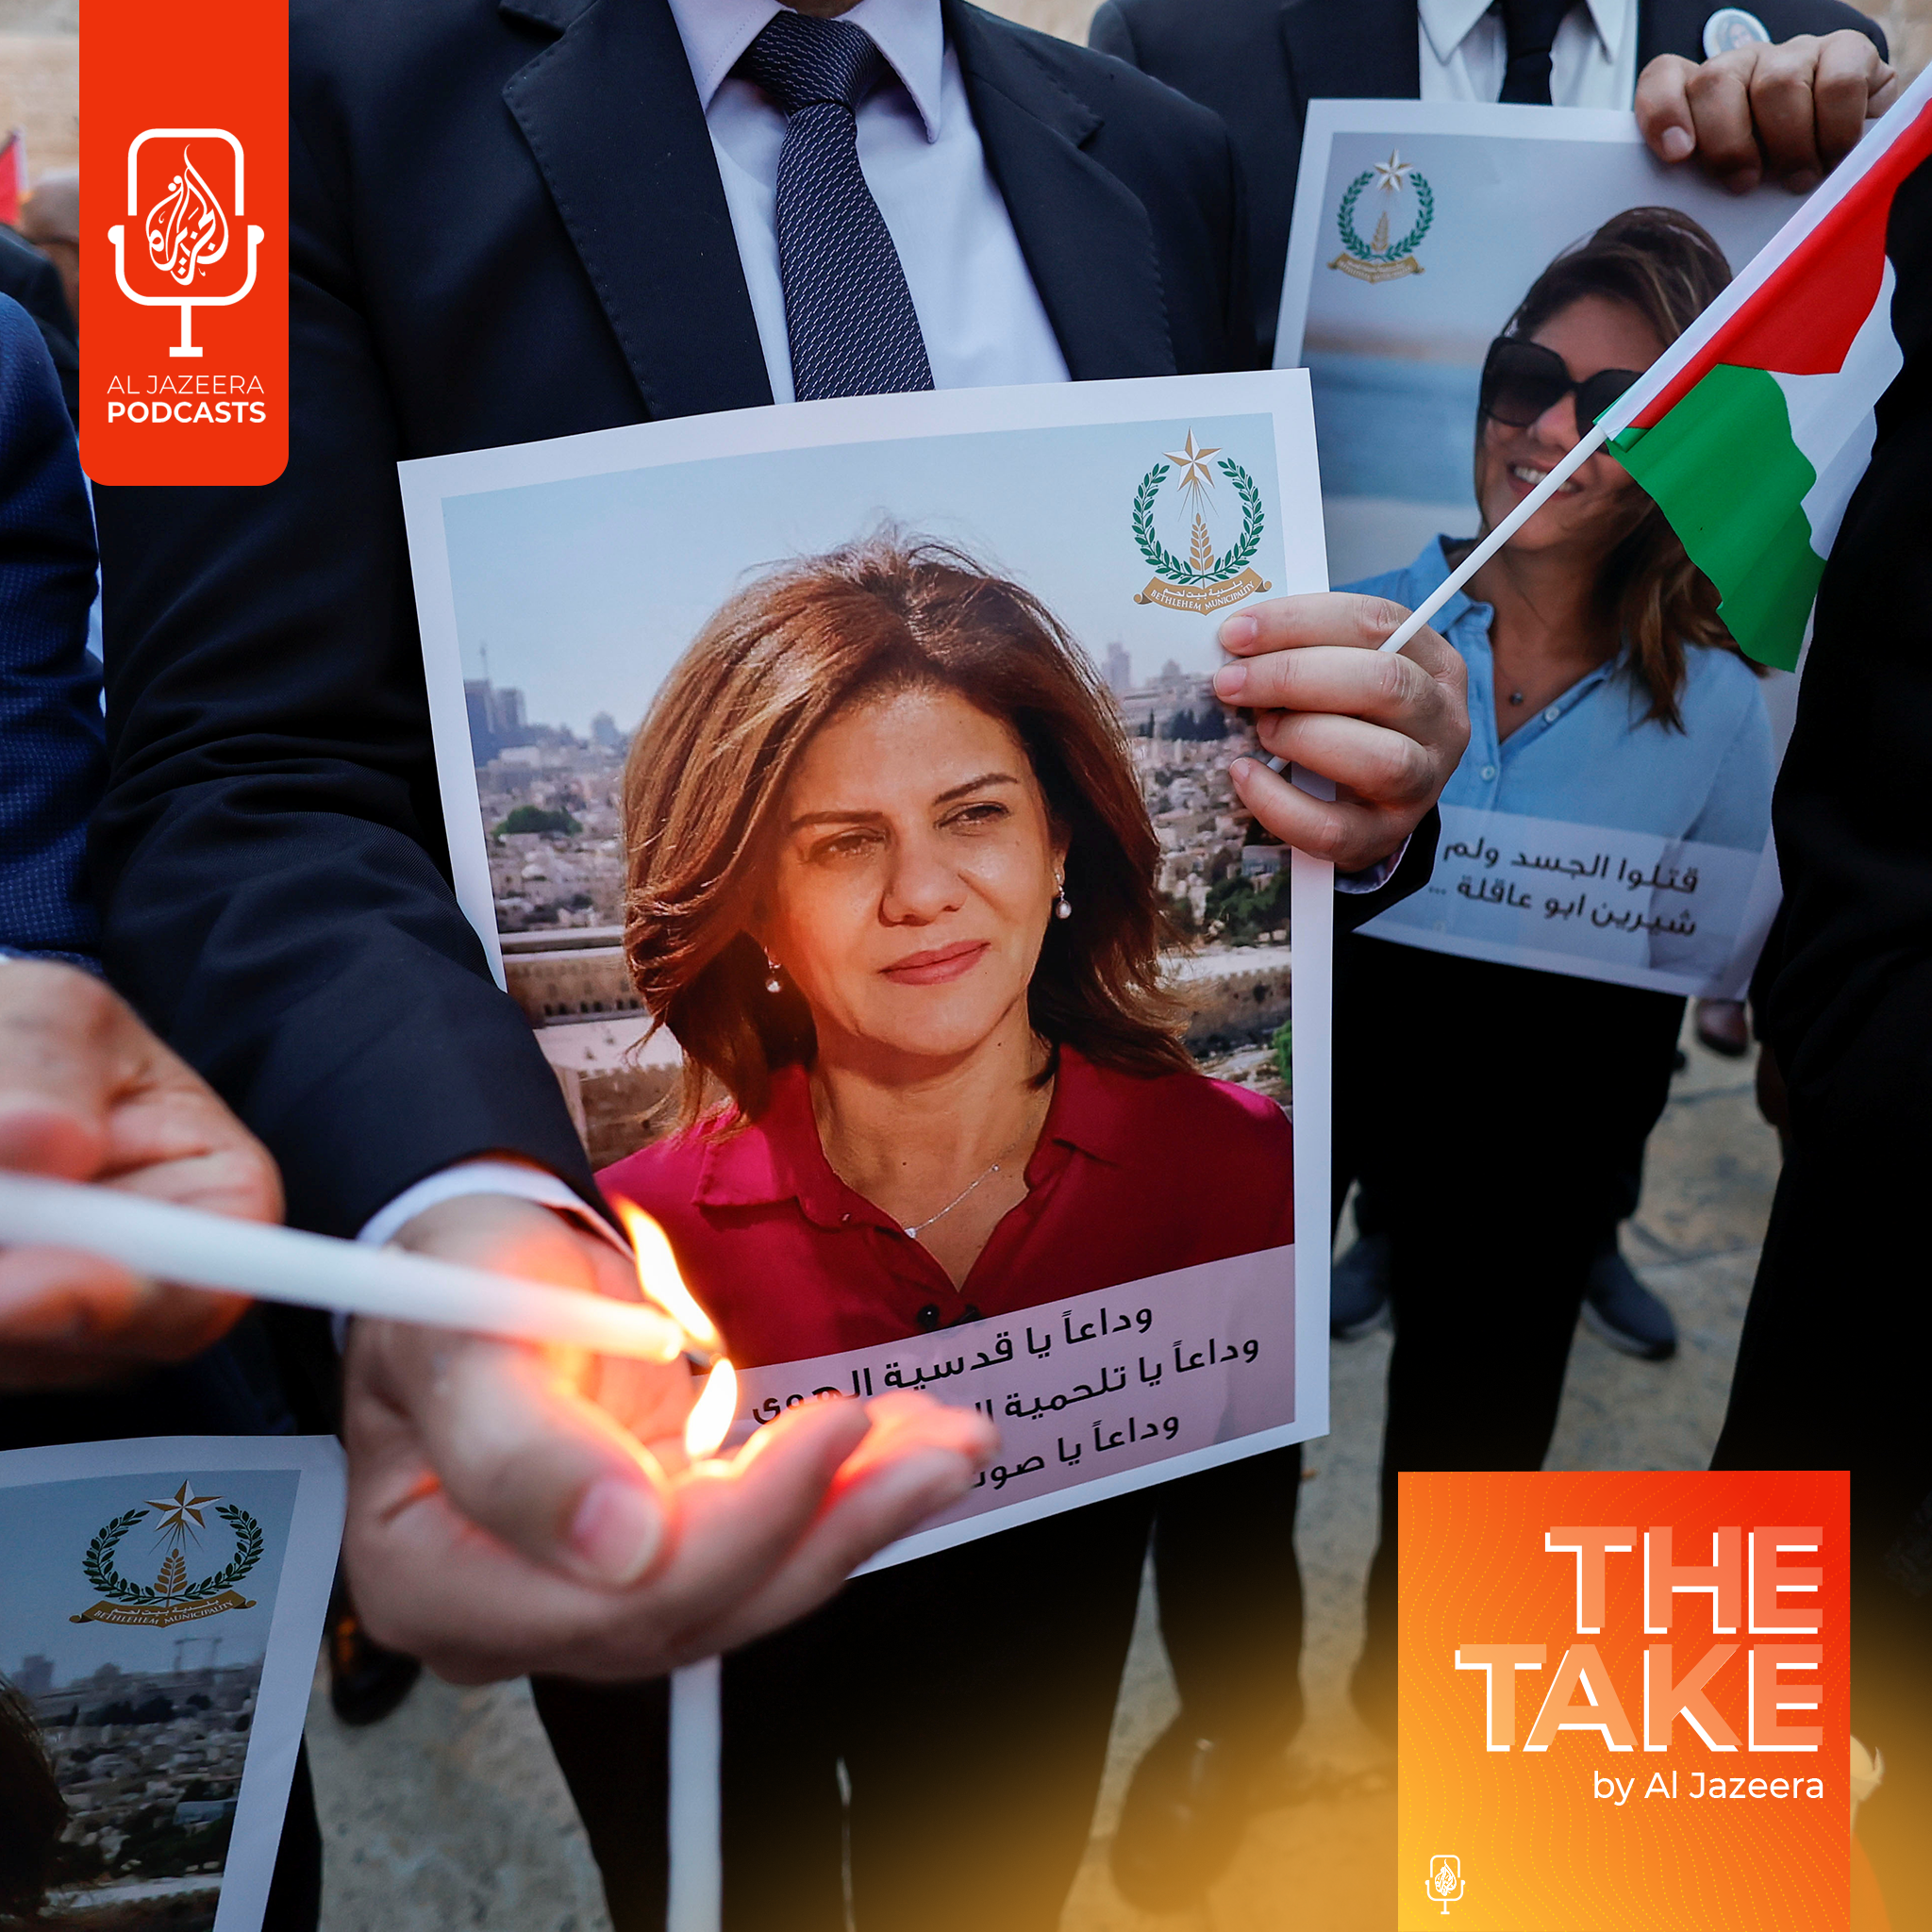 Another Take: Will there ever be justice for Shireen Abu Akleh?